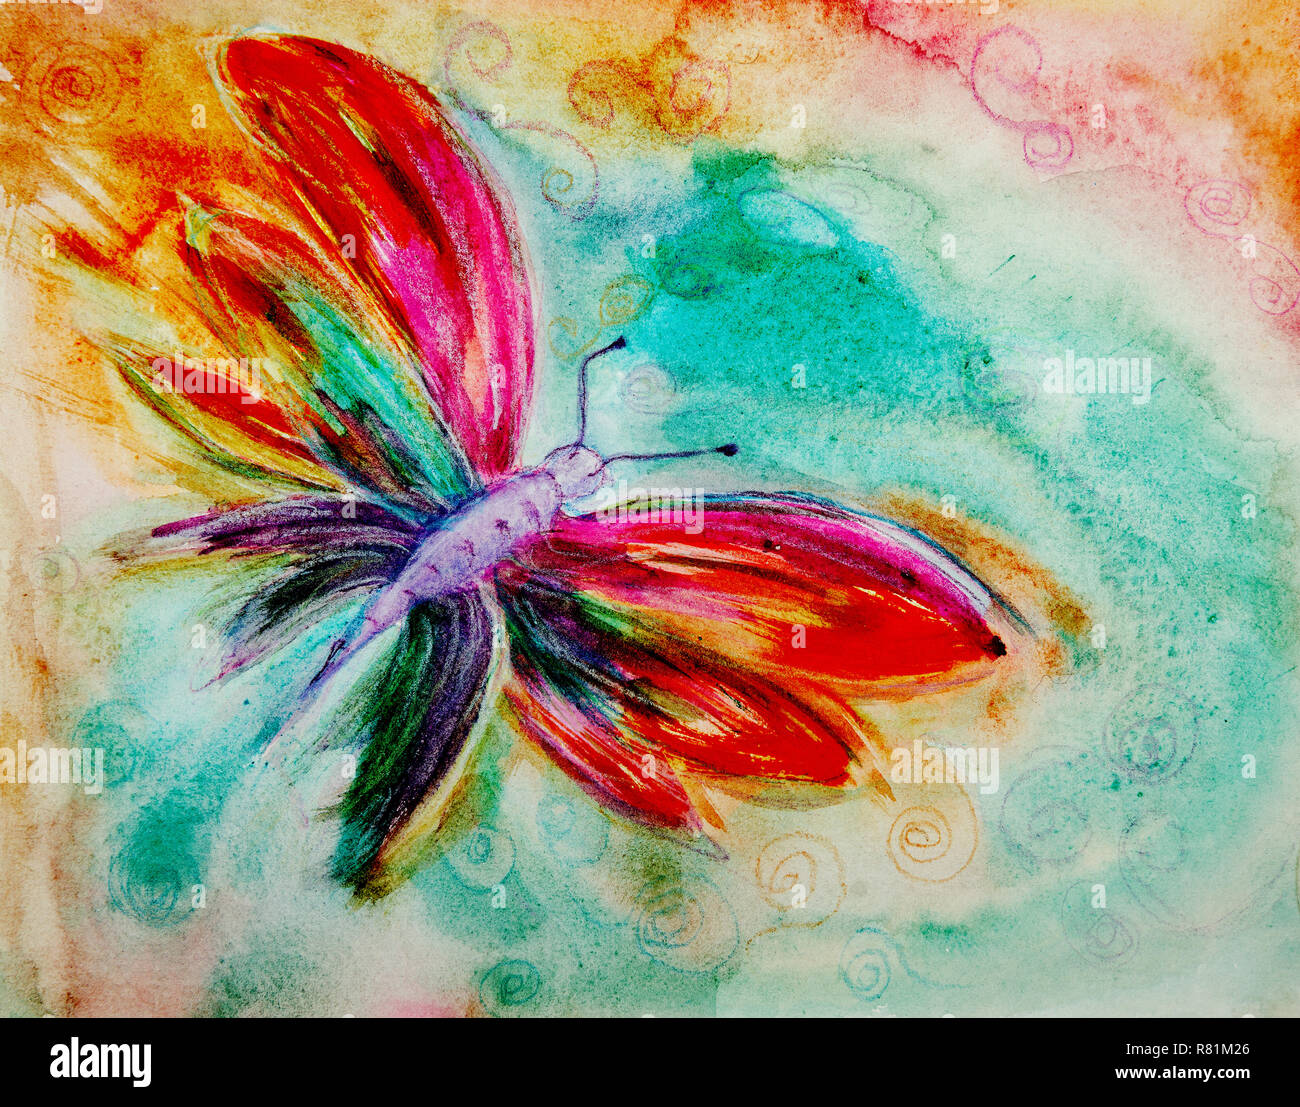 Flying butterfly painted with bright colors. The dabbing technique near the edges gives a soft focus effect due to the altered surface roughness of th Stock Photo